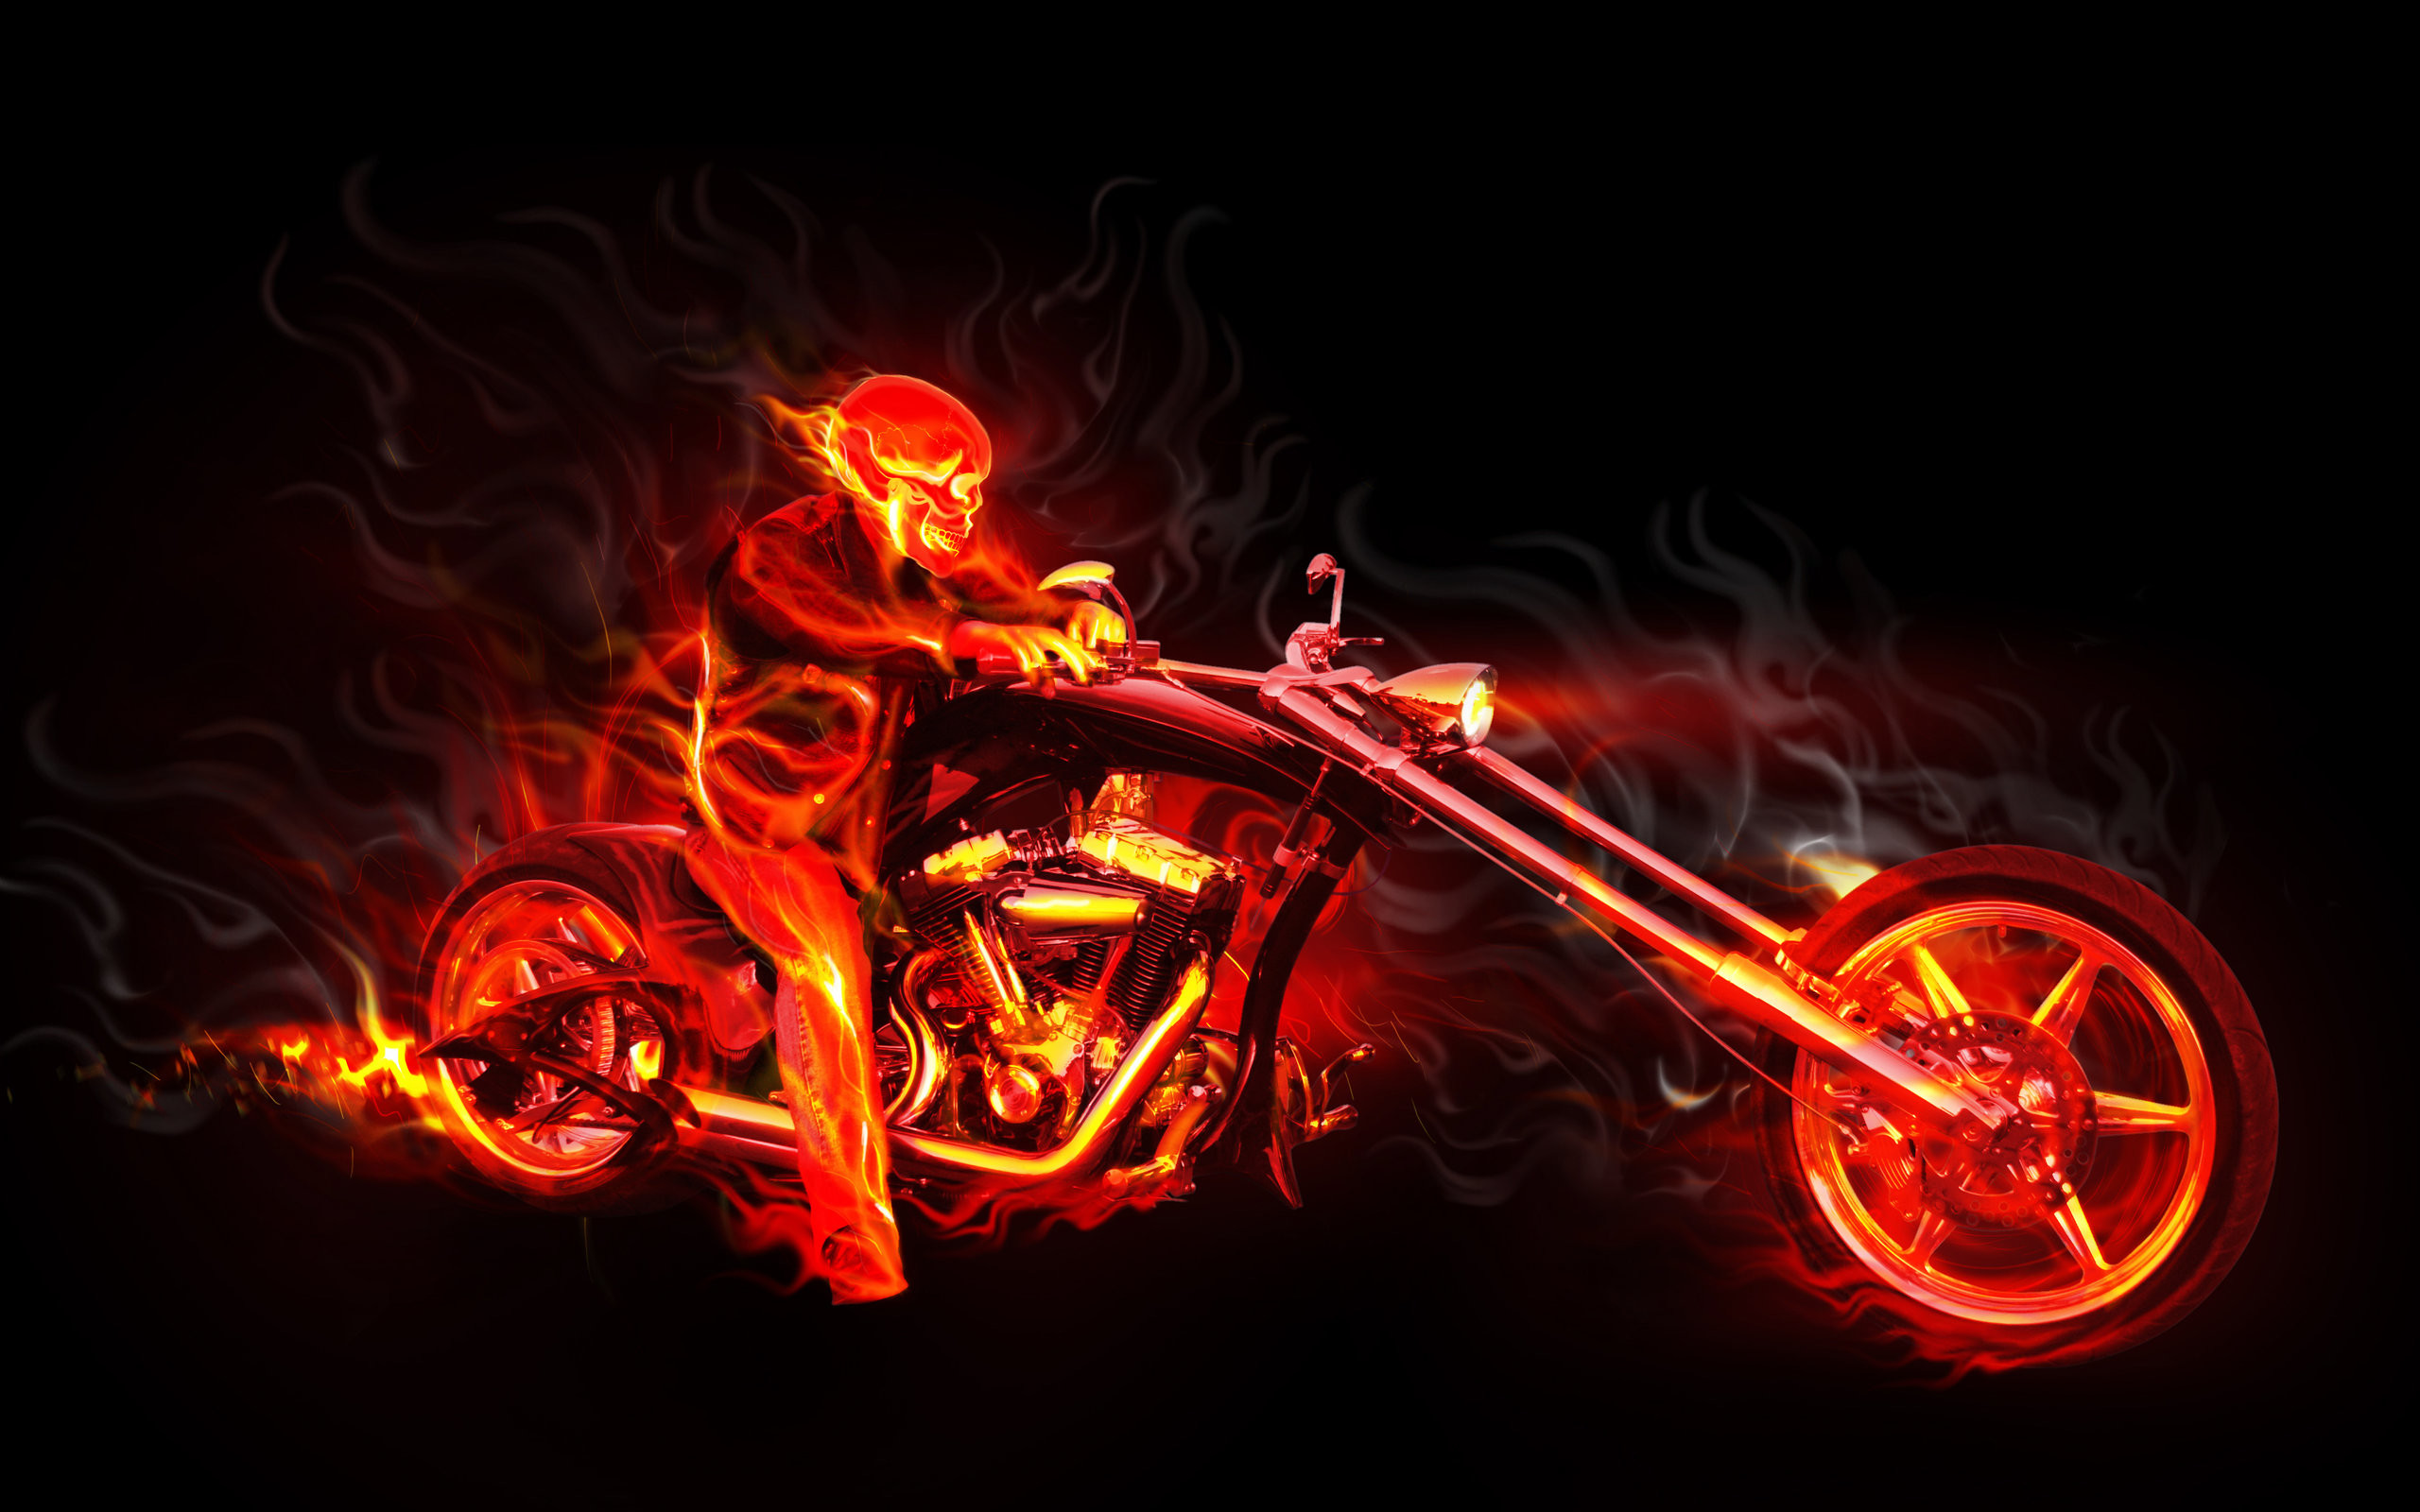 2560x1600 High Quality HD 3D Wallpaper Fire Harley Man Abstract Photo